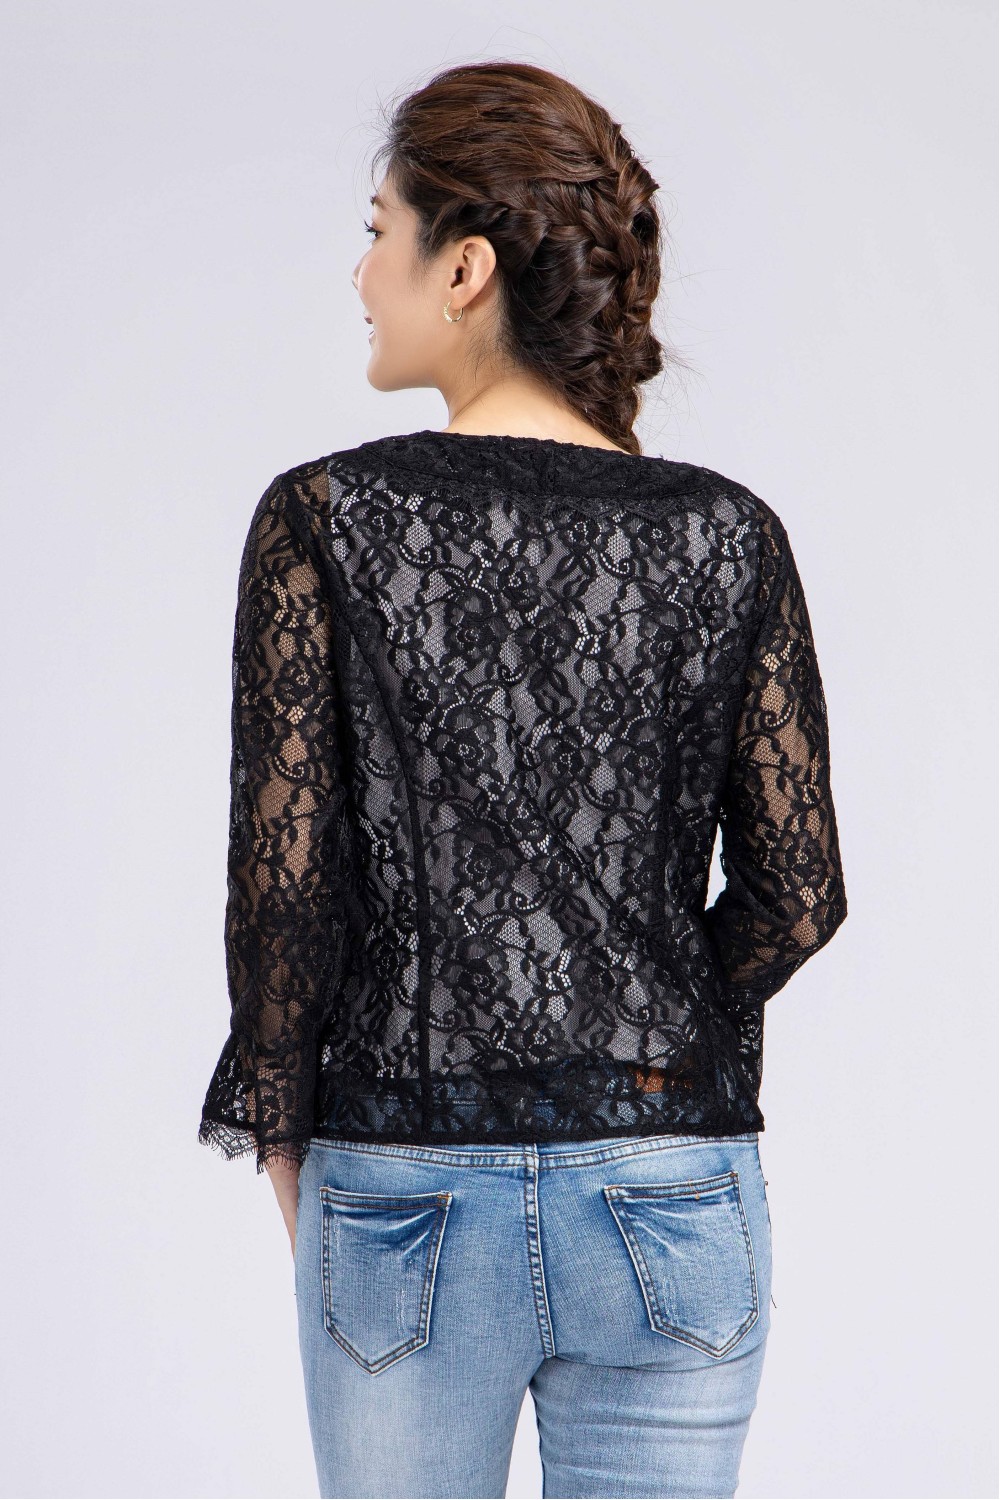 Contrast Lining Lace Blouse